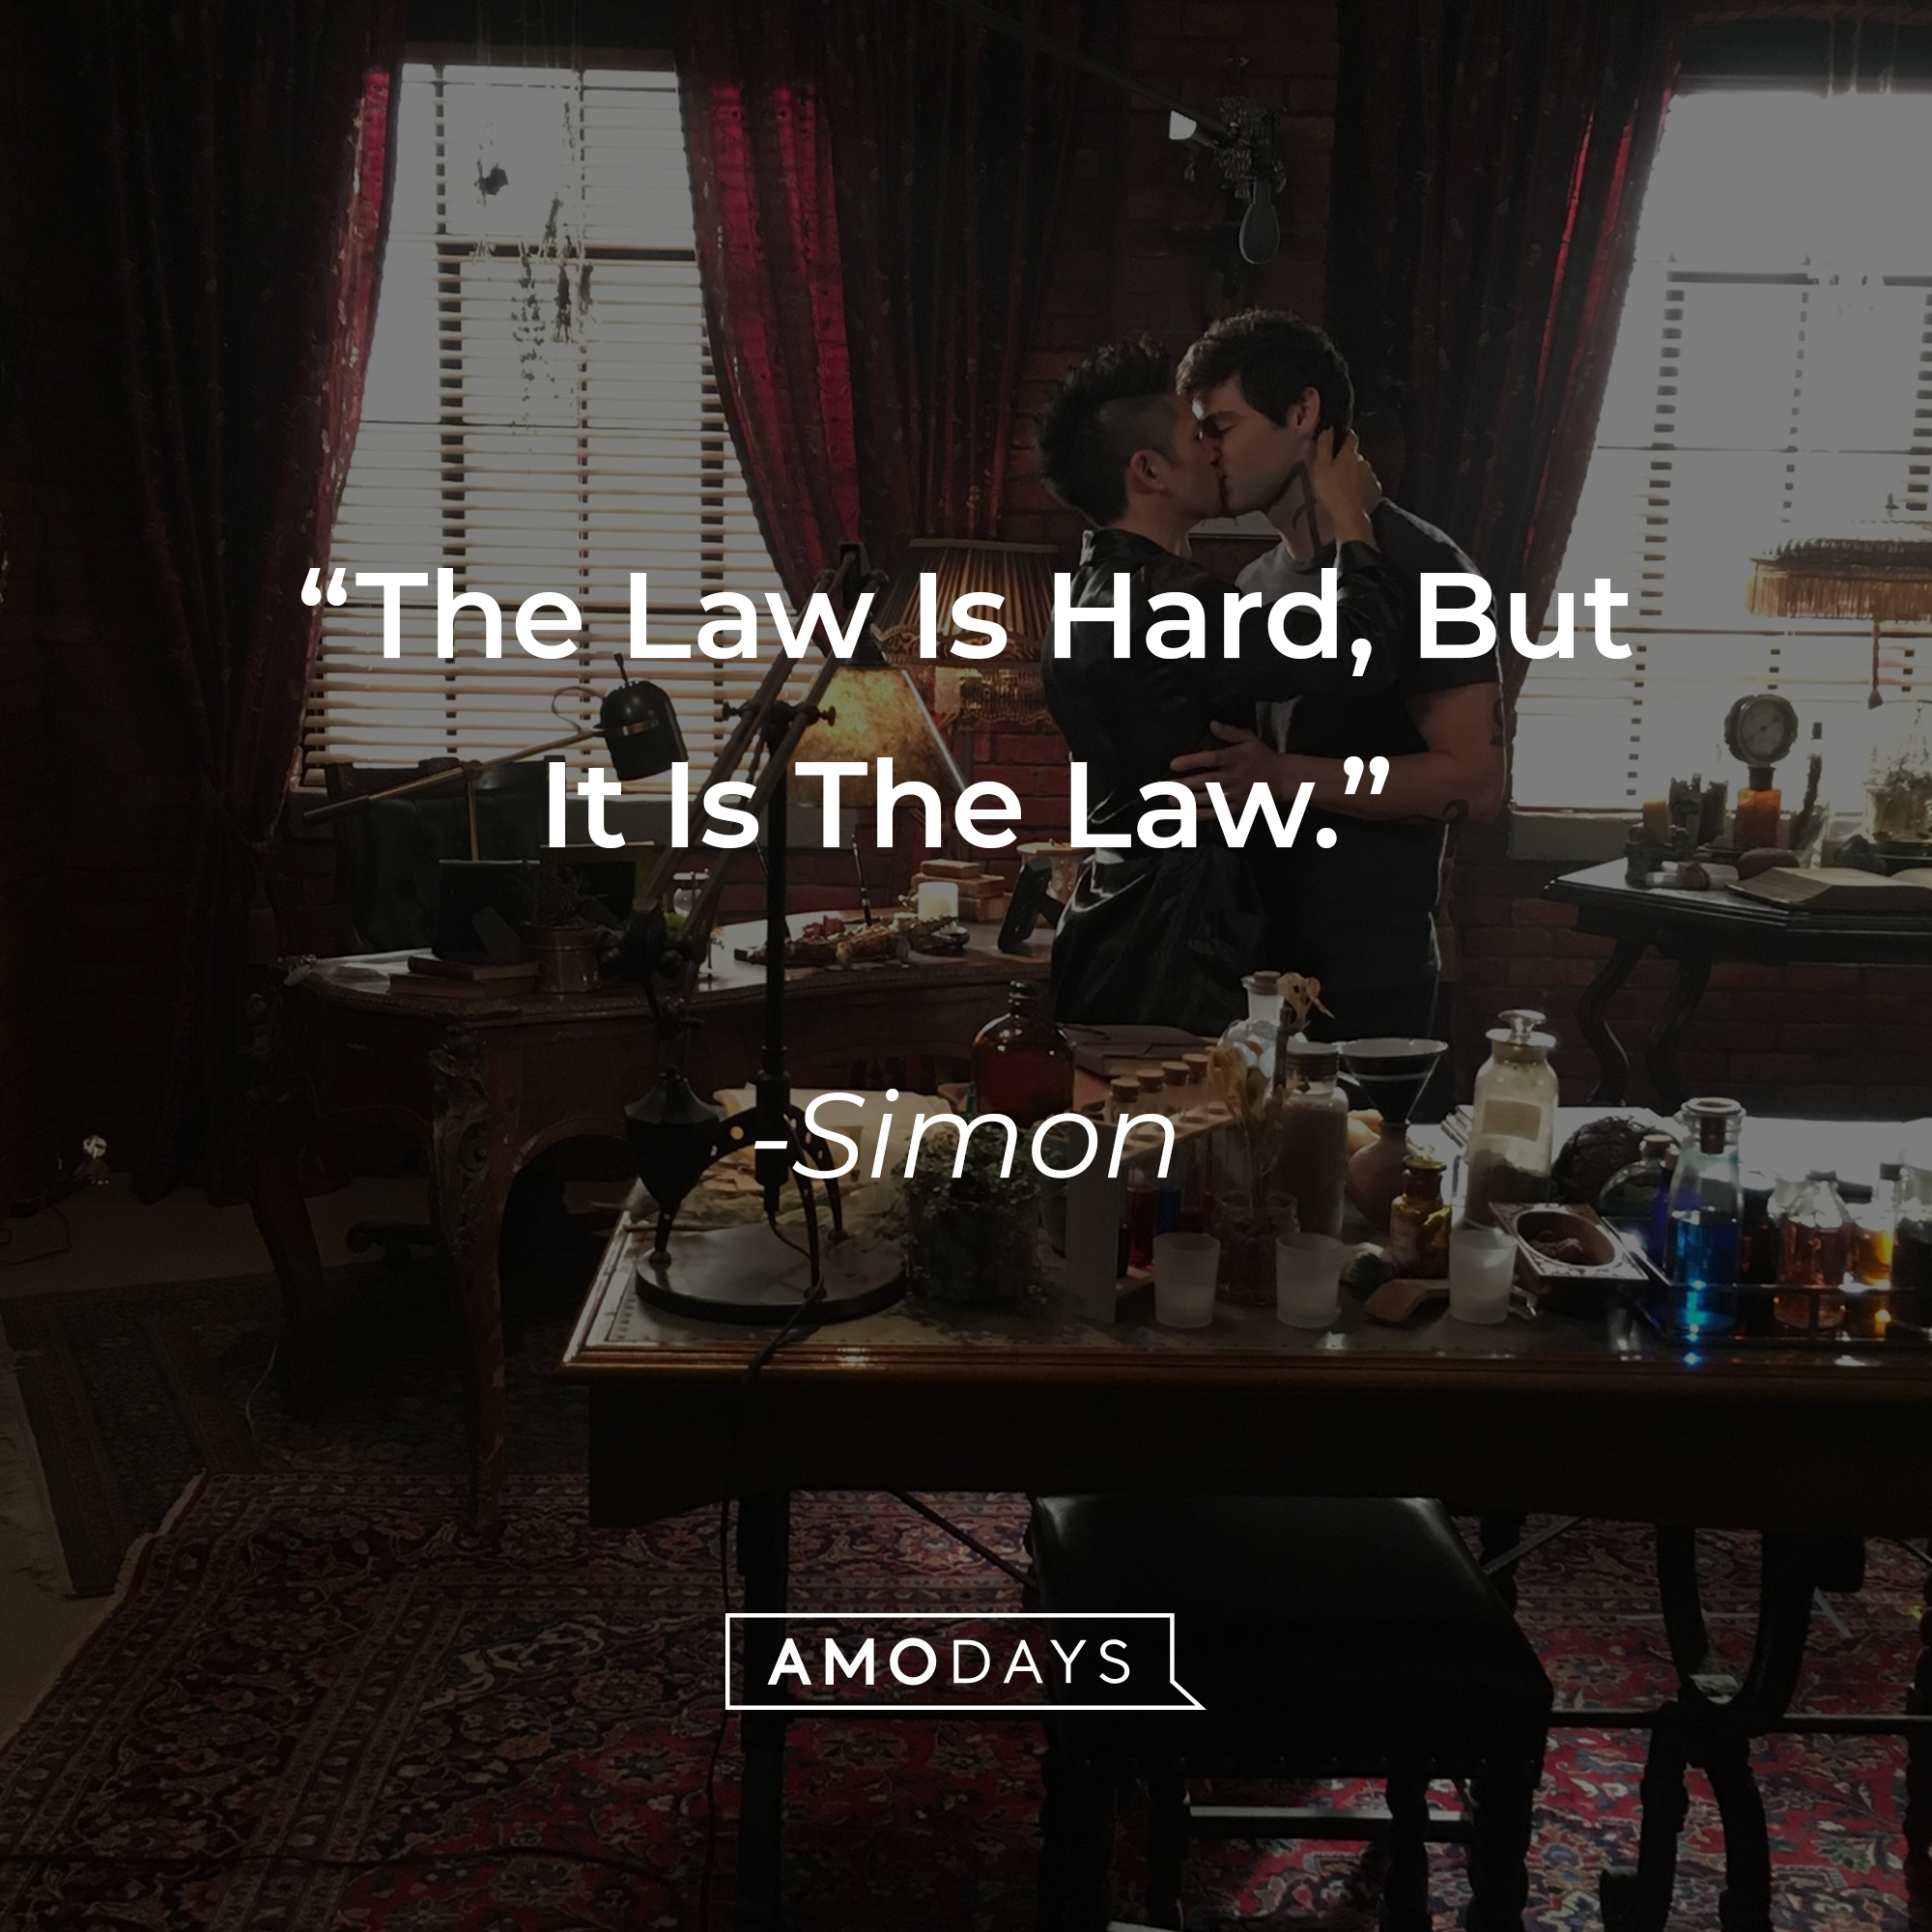 Simon's quote: "The Law Is Hard, But It Is The Law."┃Source: facebook.com/ShadowhuntersSeries